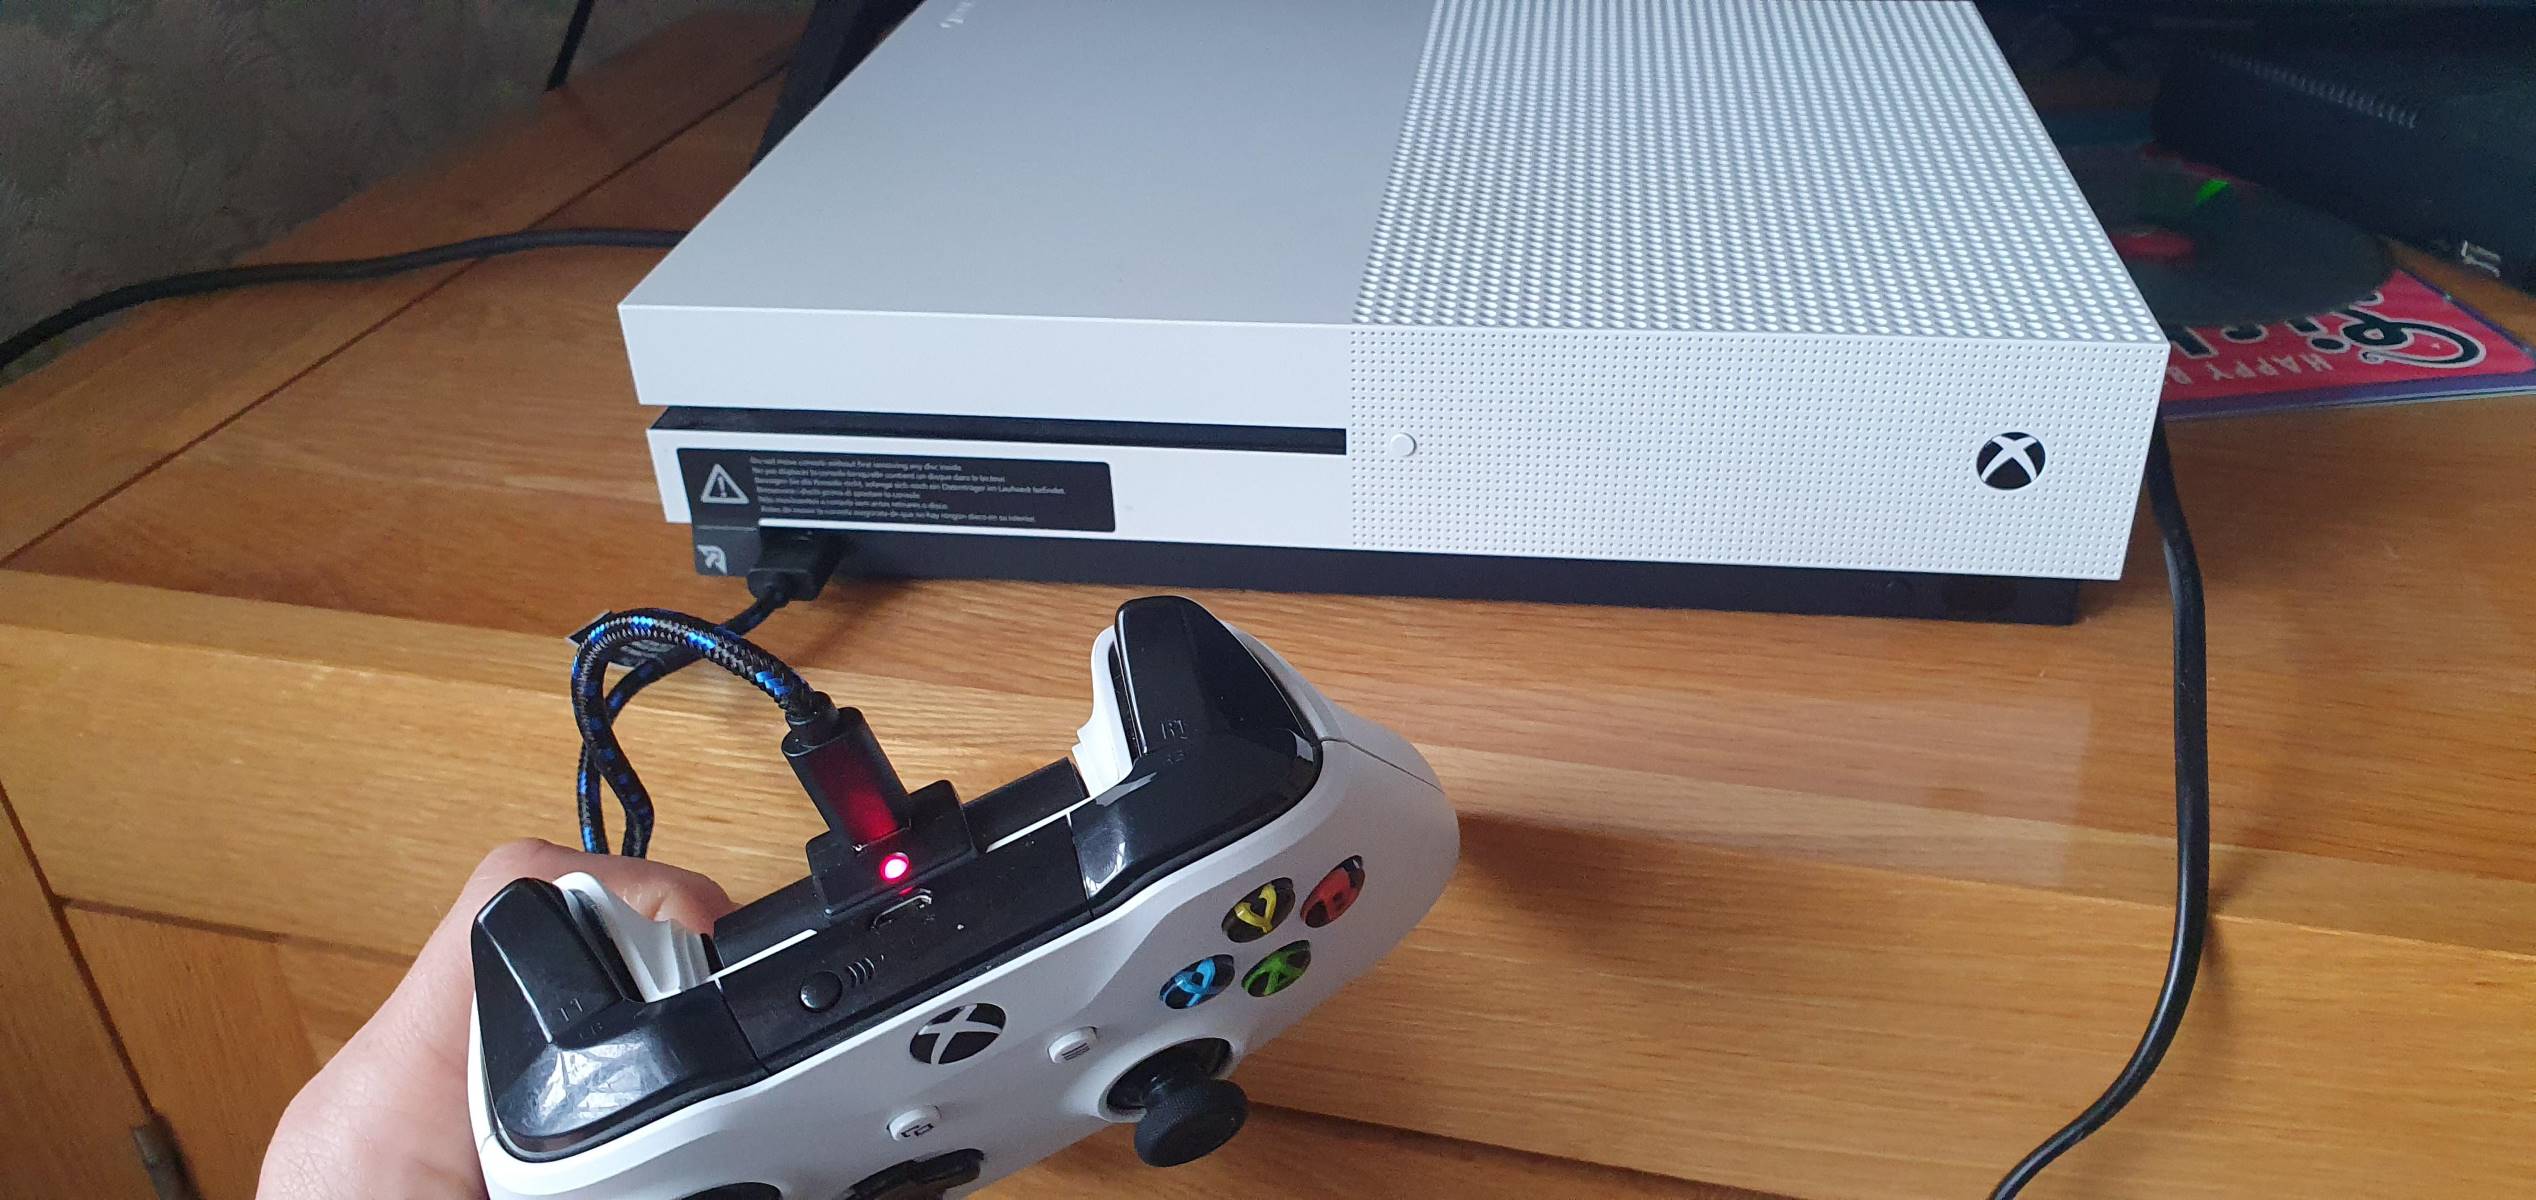 Why Won’t My Xbox One Adapter Work In A USB Hub